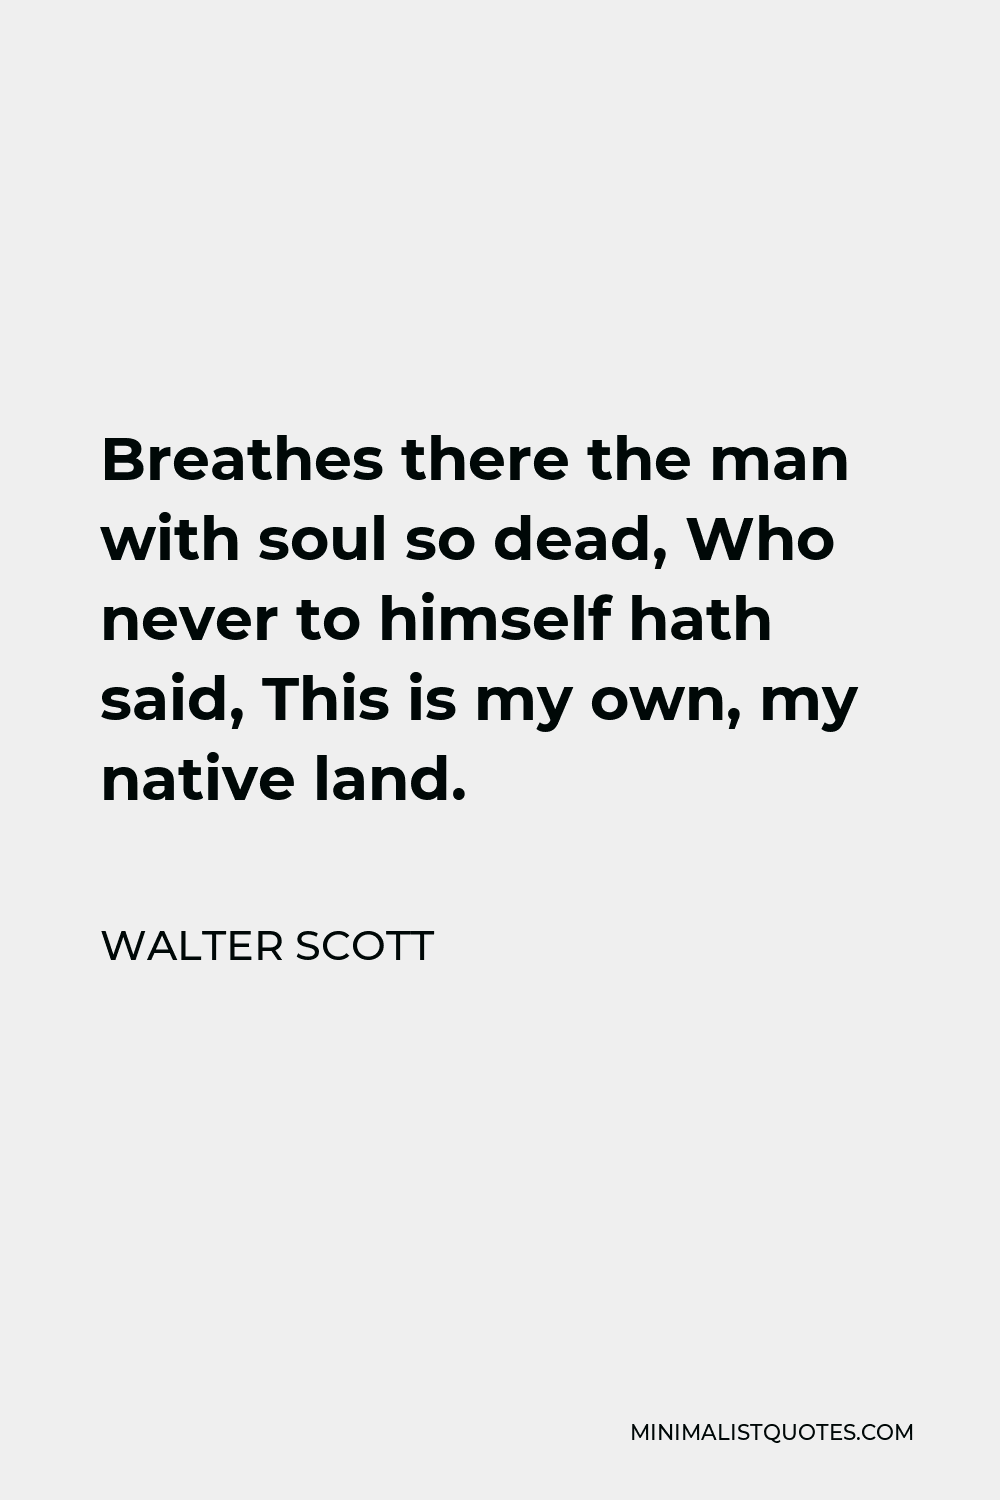 Walter Scott Quote - Breathes there the man with soul so dead, Who never to himself hath said, This is my own, my native land.